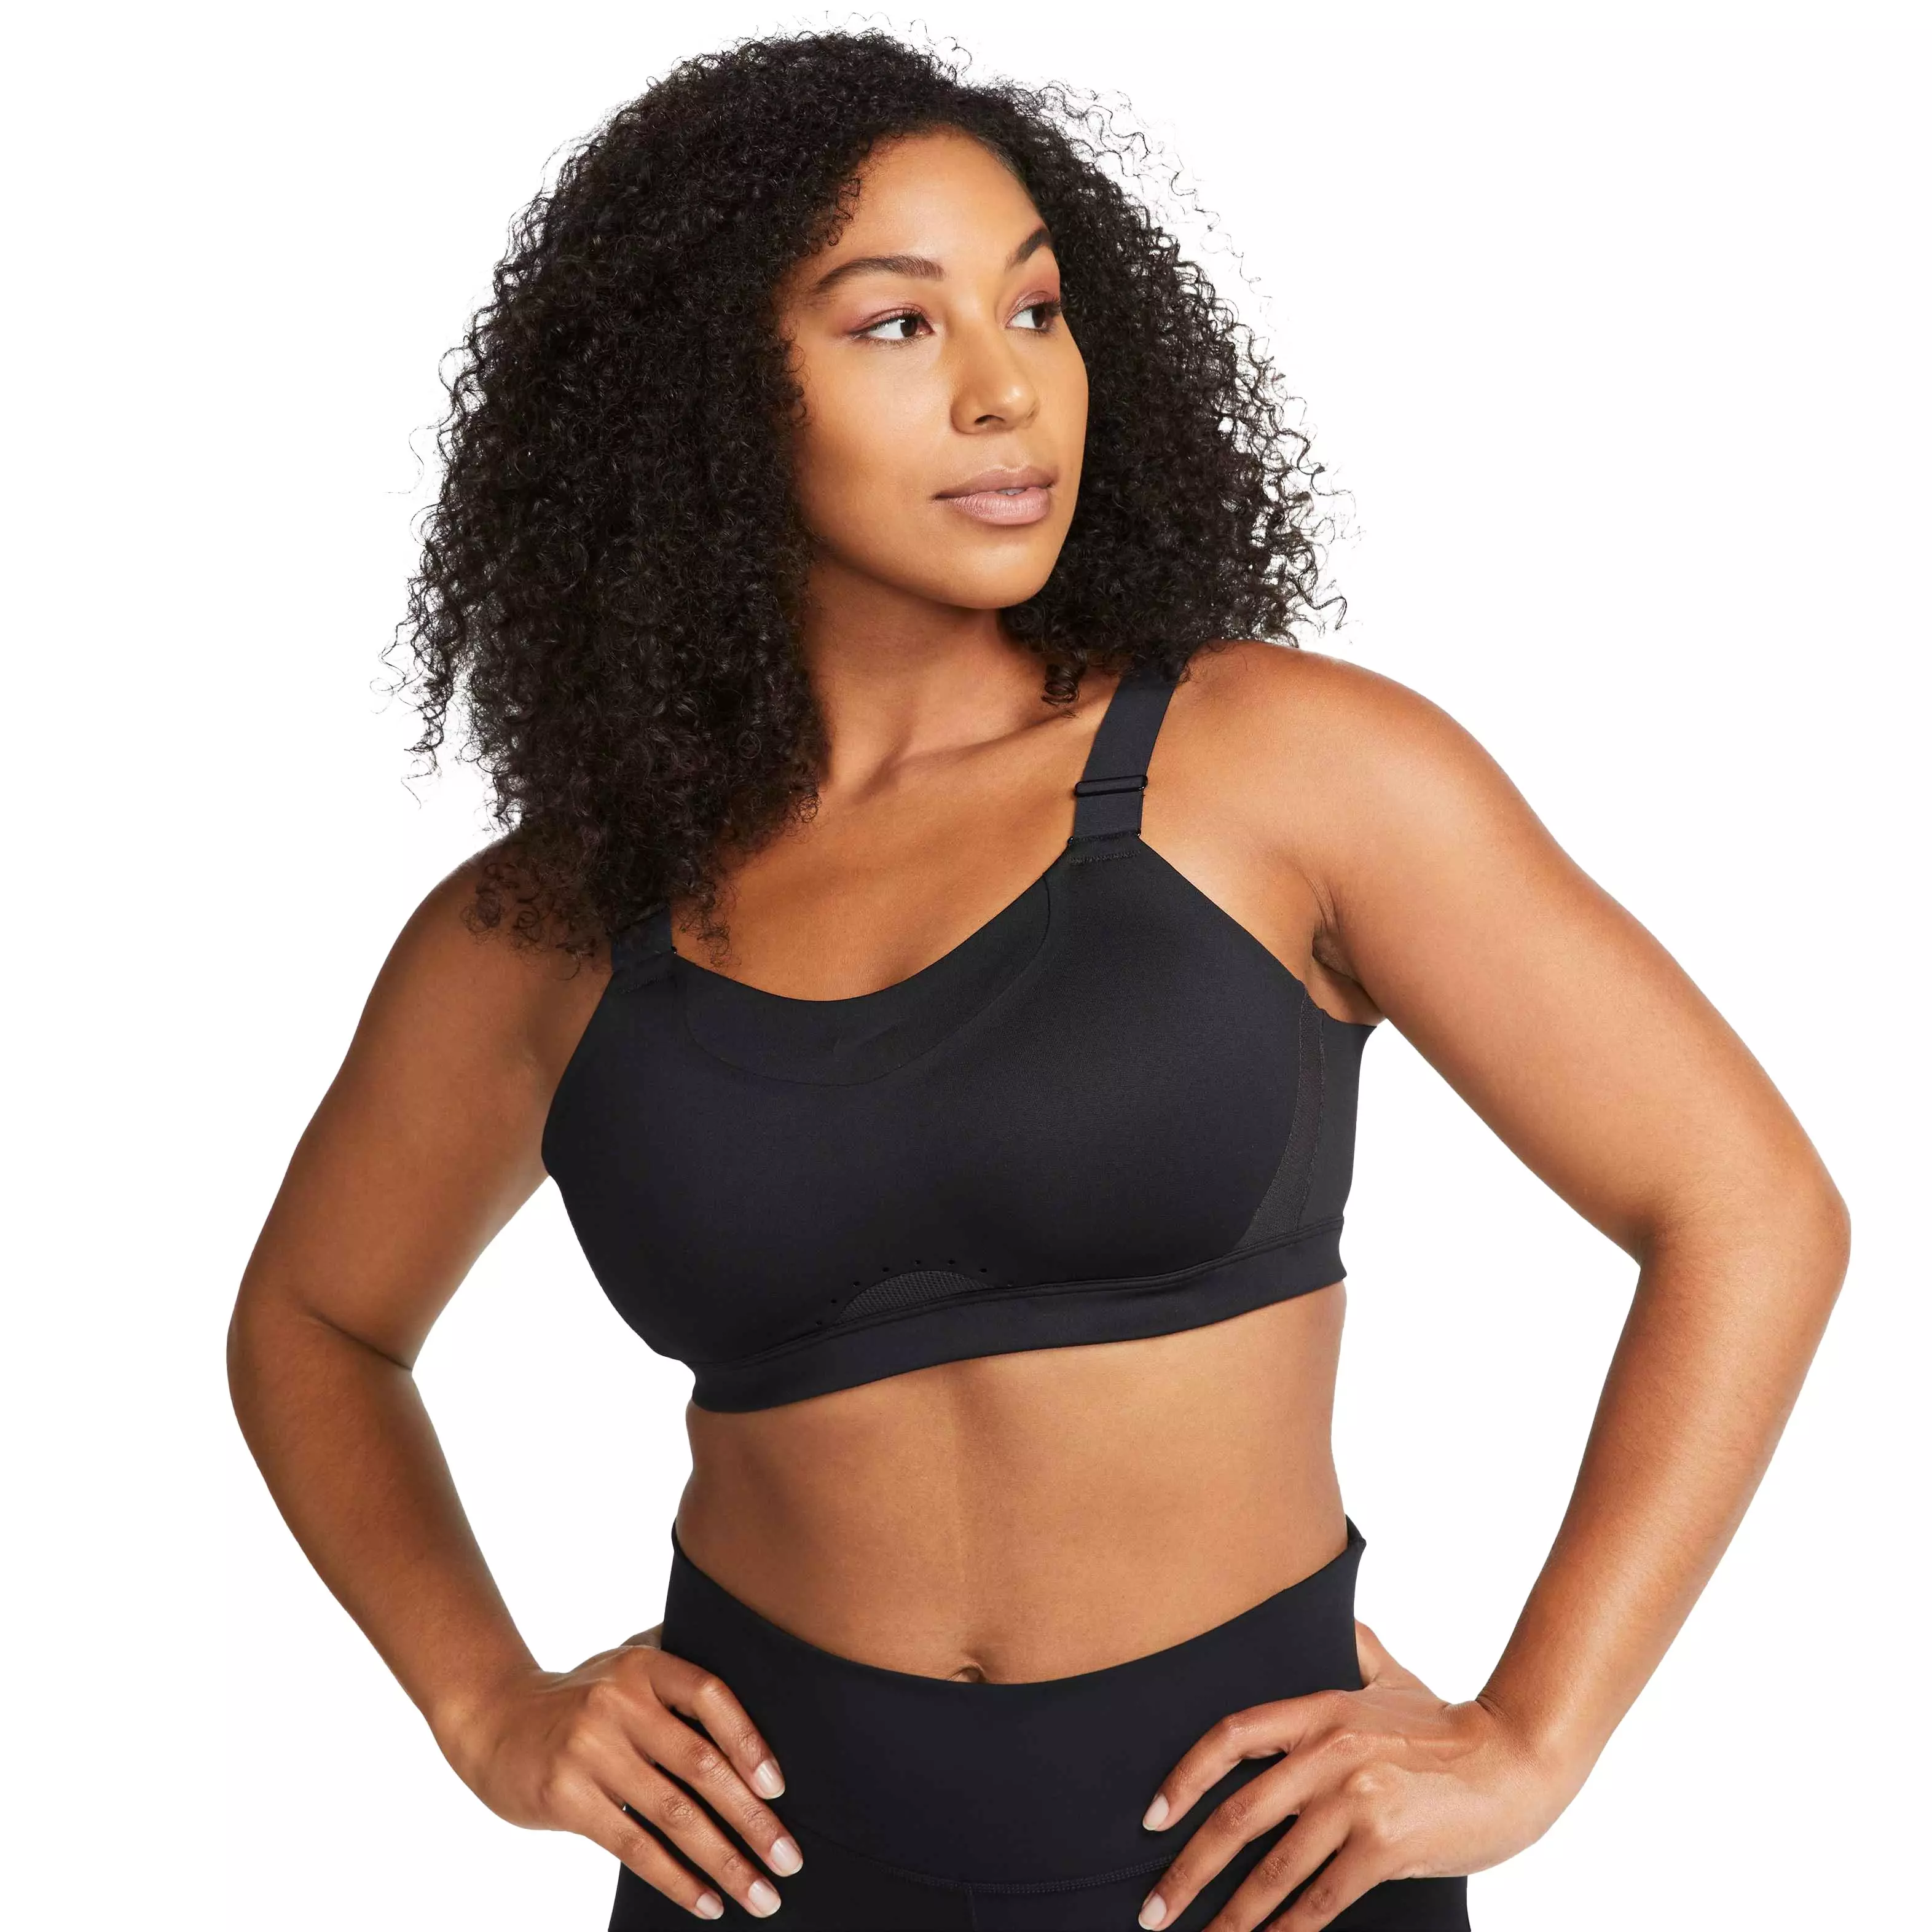 The North Face Training Bounce B Gone high suppport sports bra in